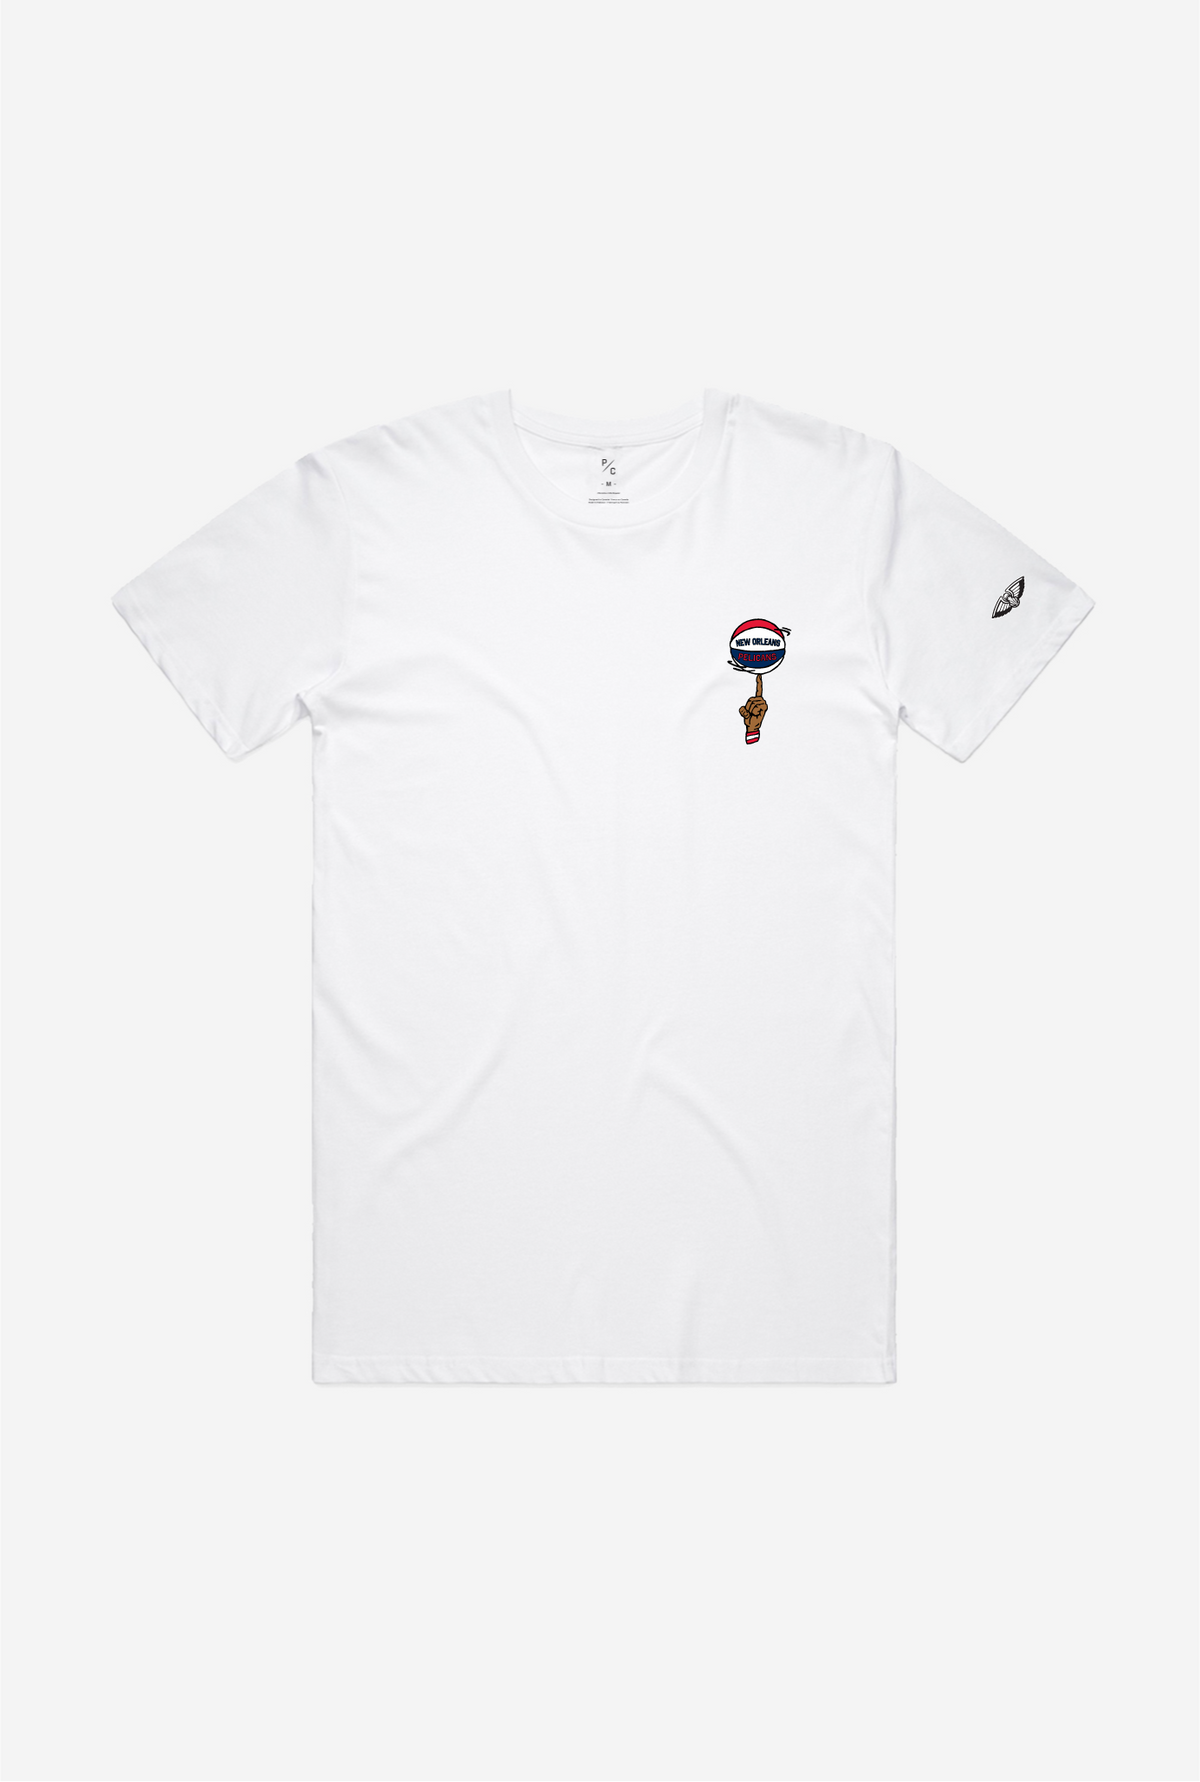 New Orleans Pelicans Spinning Ball T-Shirt - White